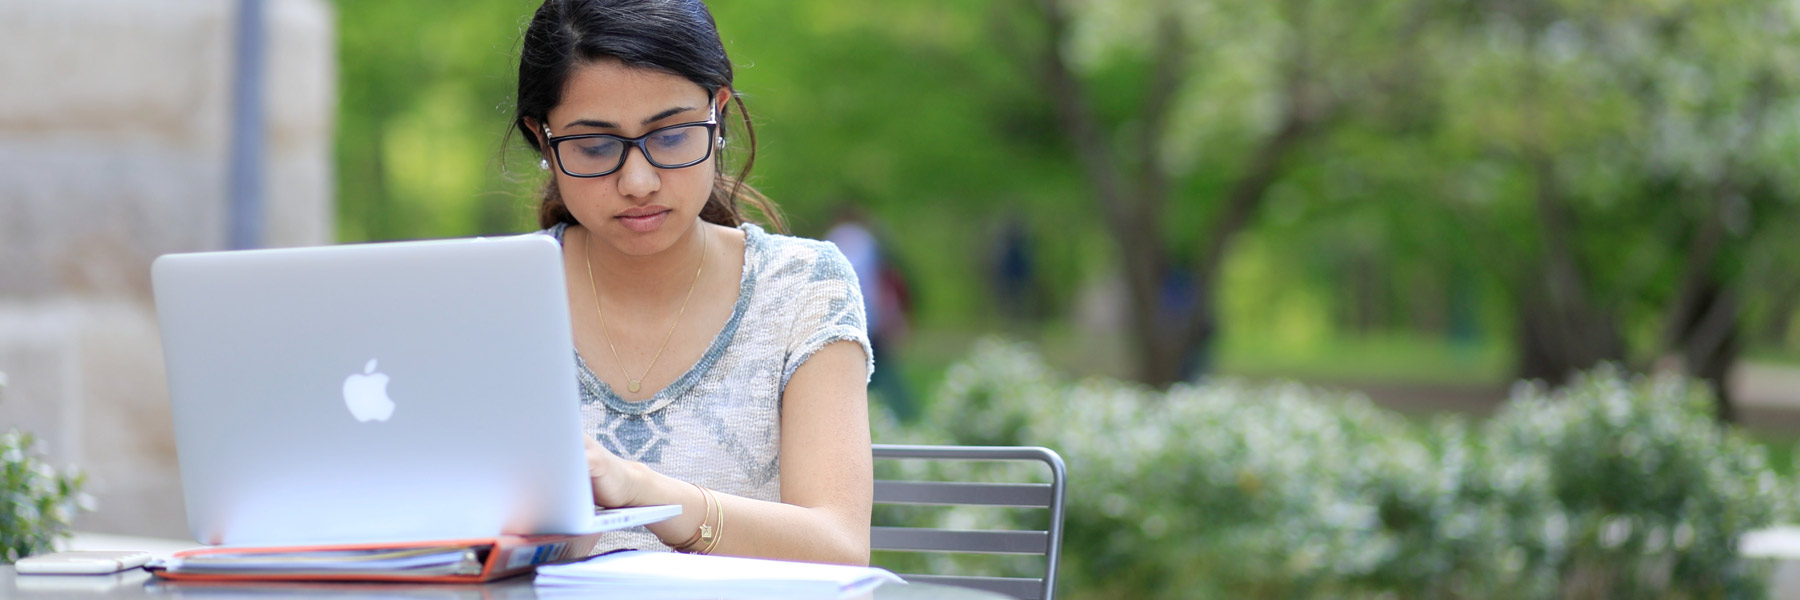 Bihar Board Exam 2019 Date Sheet: BSEB 10th 12th Board Exam dates announced, check schedule here 